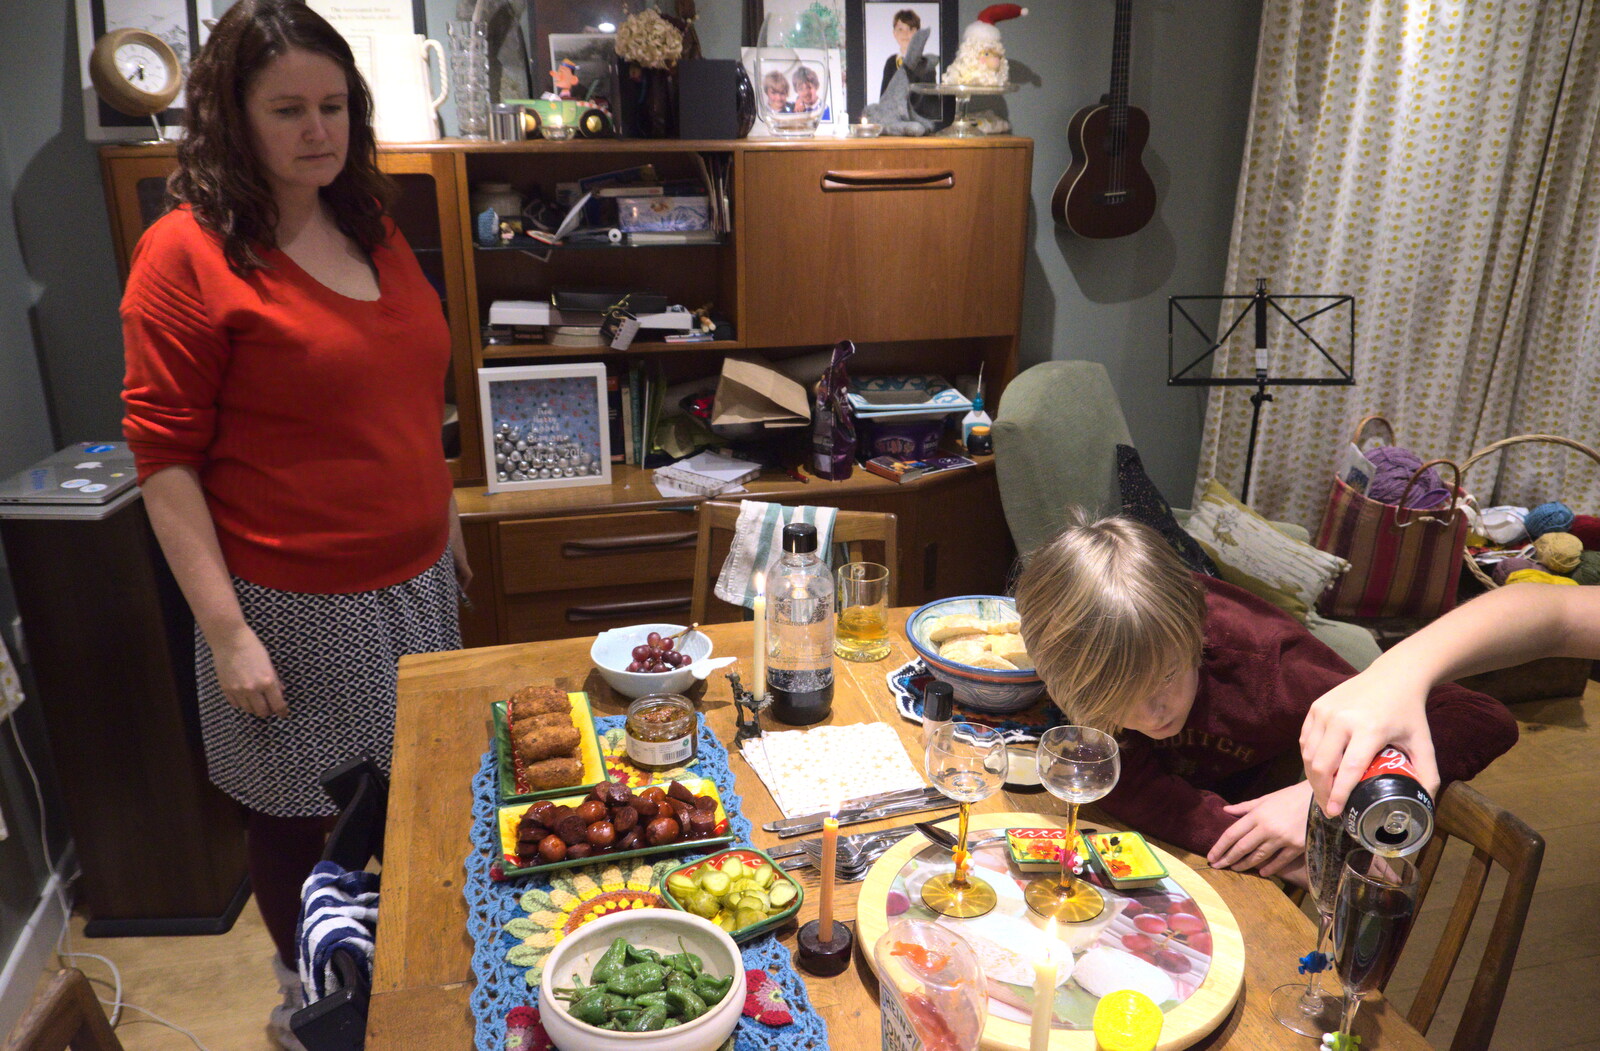 Isobel surveys the table from A Virtual New Year's Eve, Brome, Suffolk - 31st December 2020